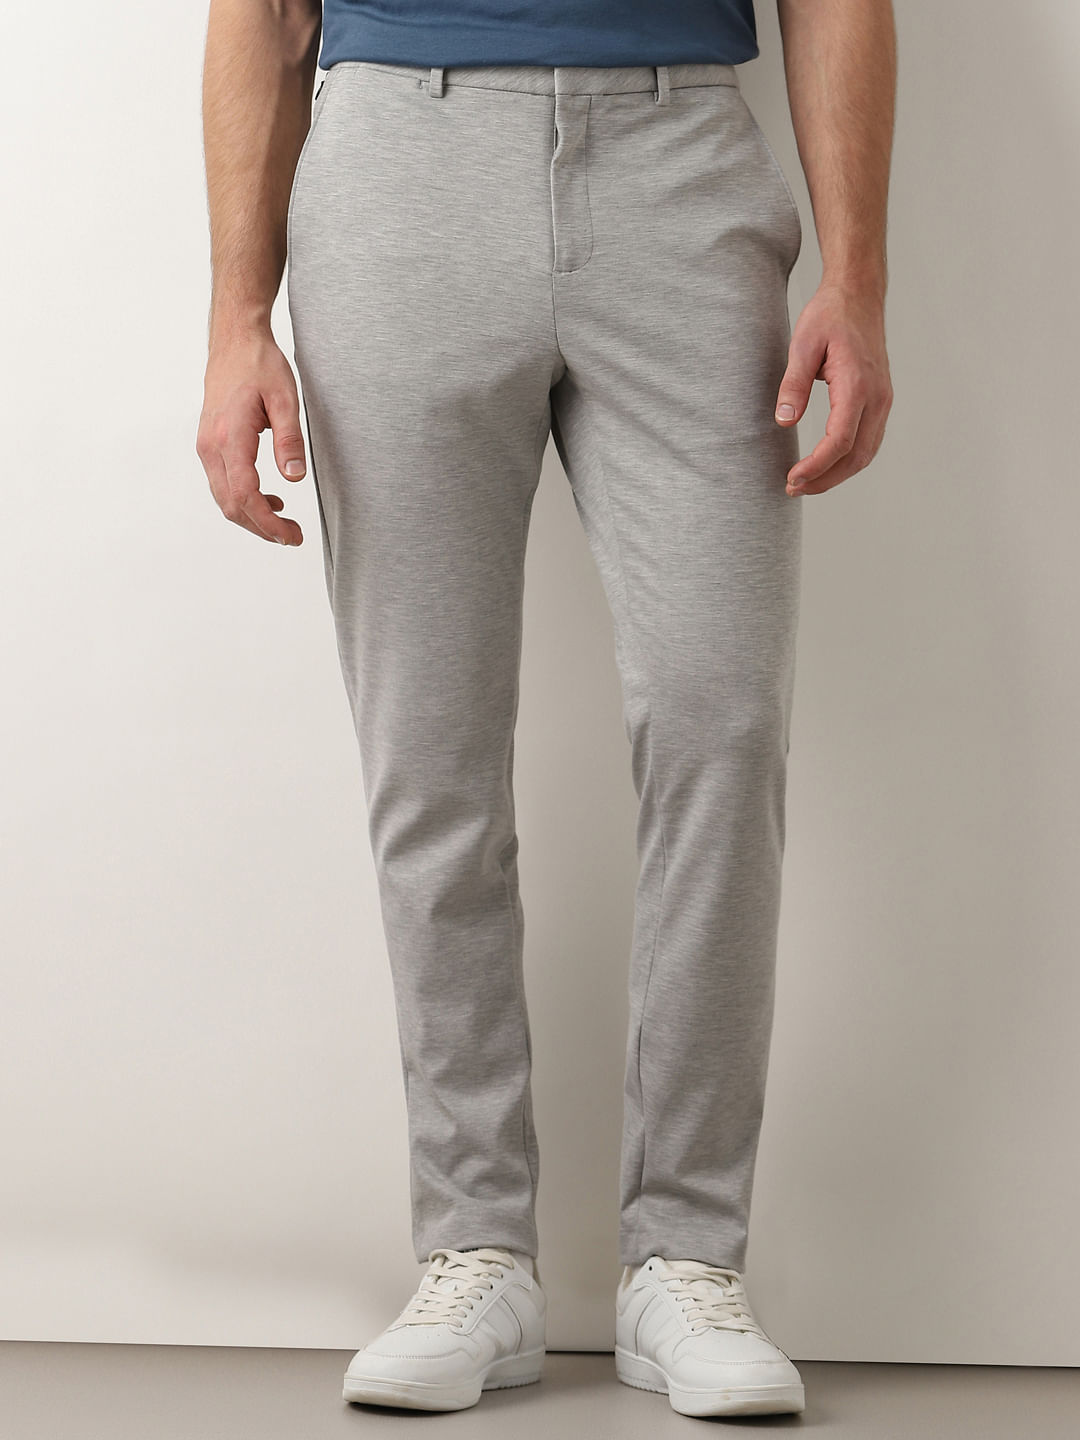 Men's knitted pants with elastic waistband - dark grey V2 OM-PACP-0116 |  Ombre.com - Men's clothing online